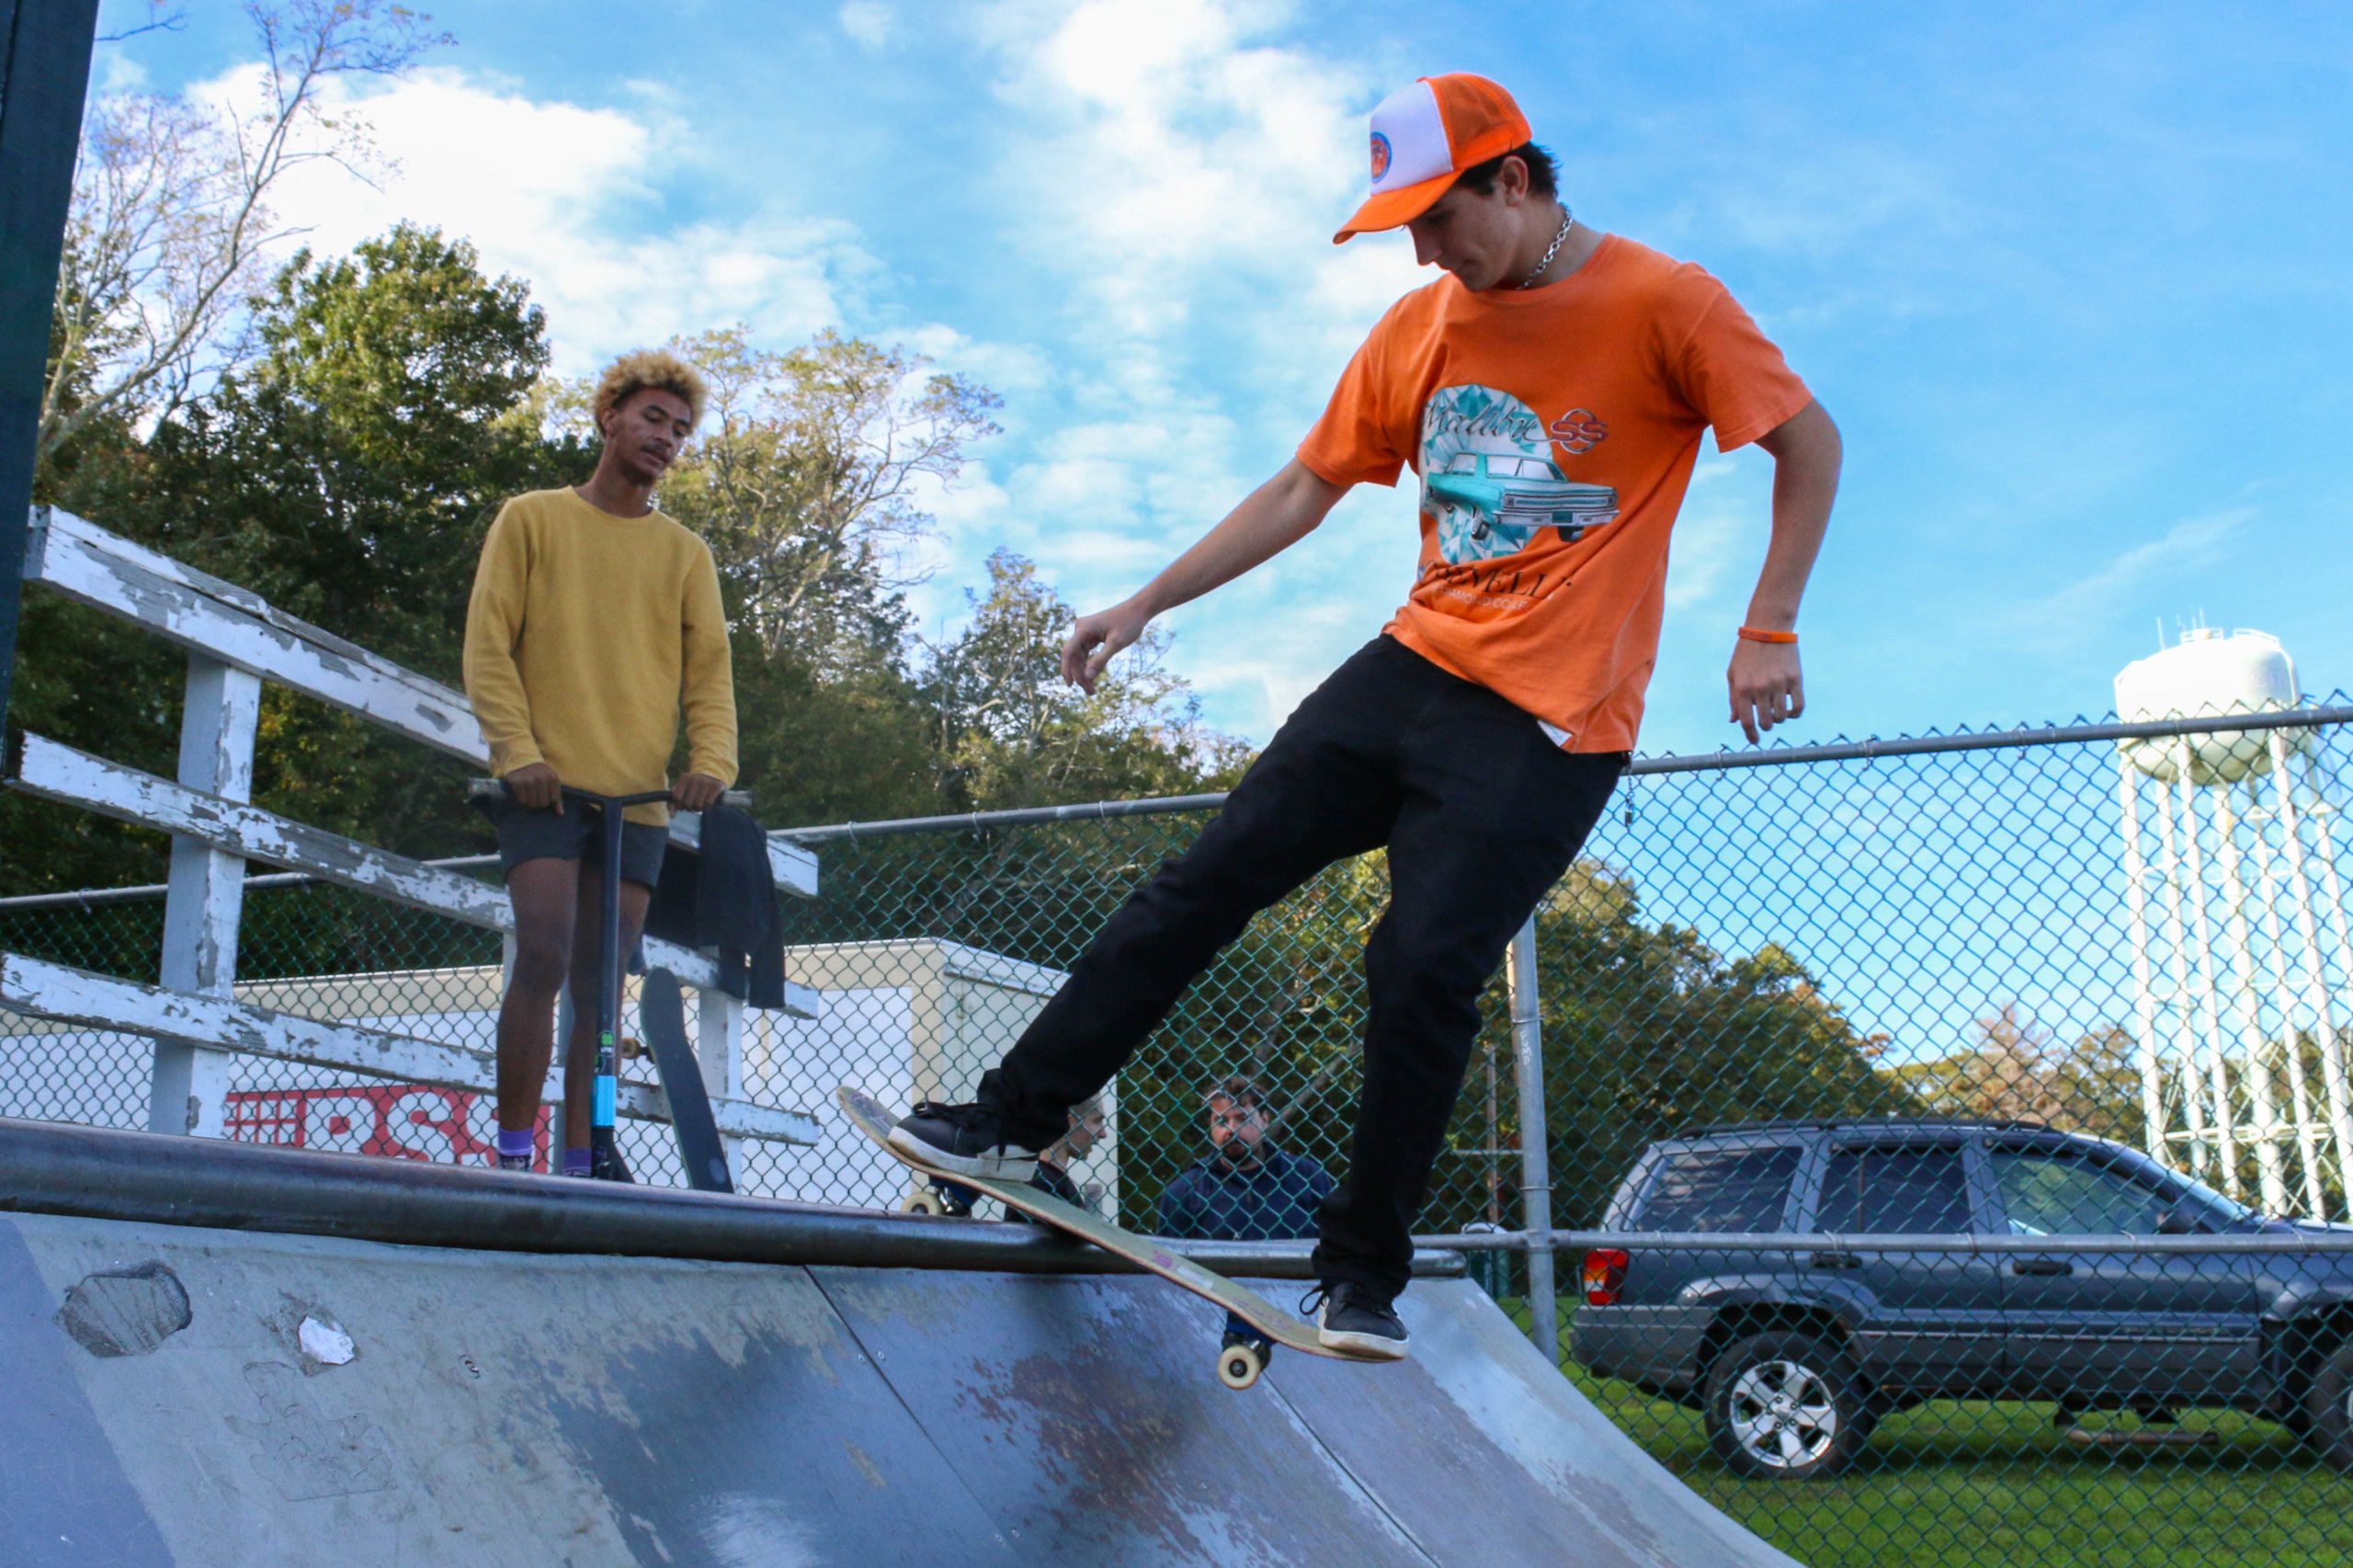 Sean Szynaka on one of the smaller ramps at the Greenport Skate Park on the North Fork